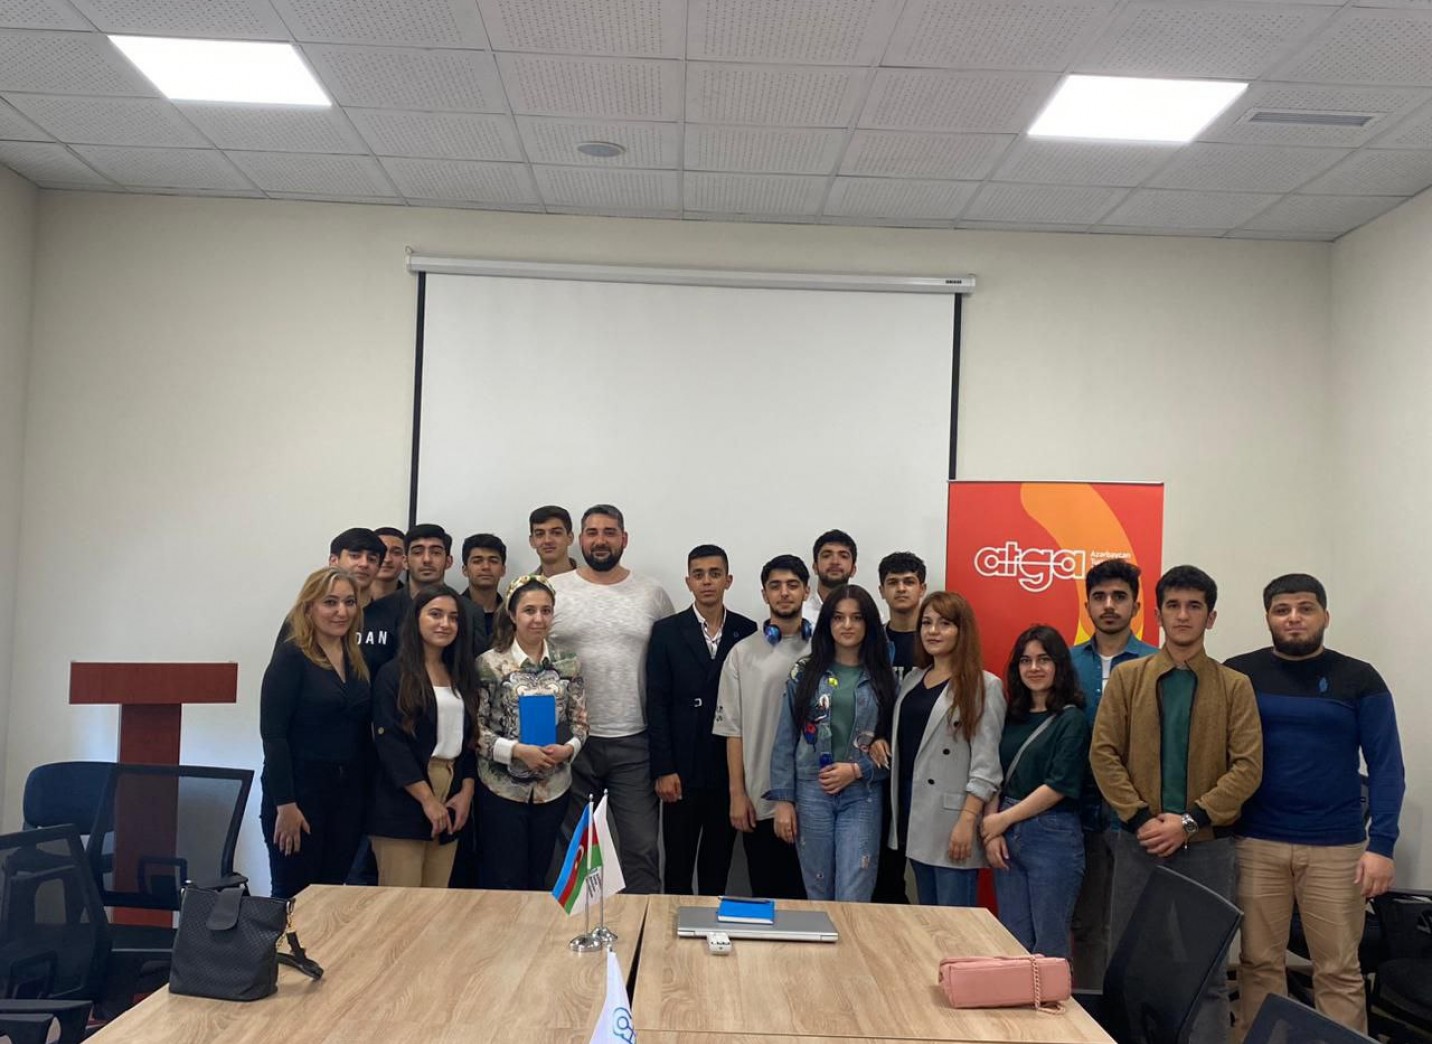 A meeting was held with a group of students from the University of Tourism and Management under the organization of the ATGA